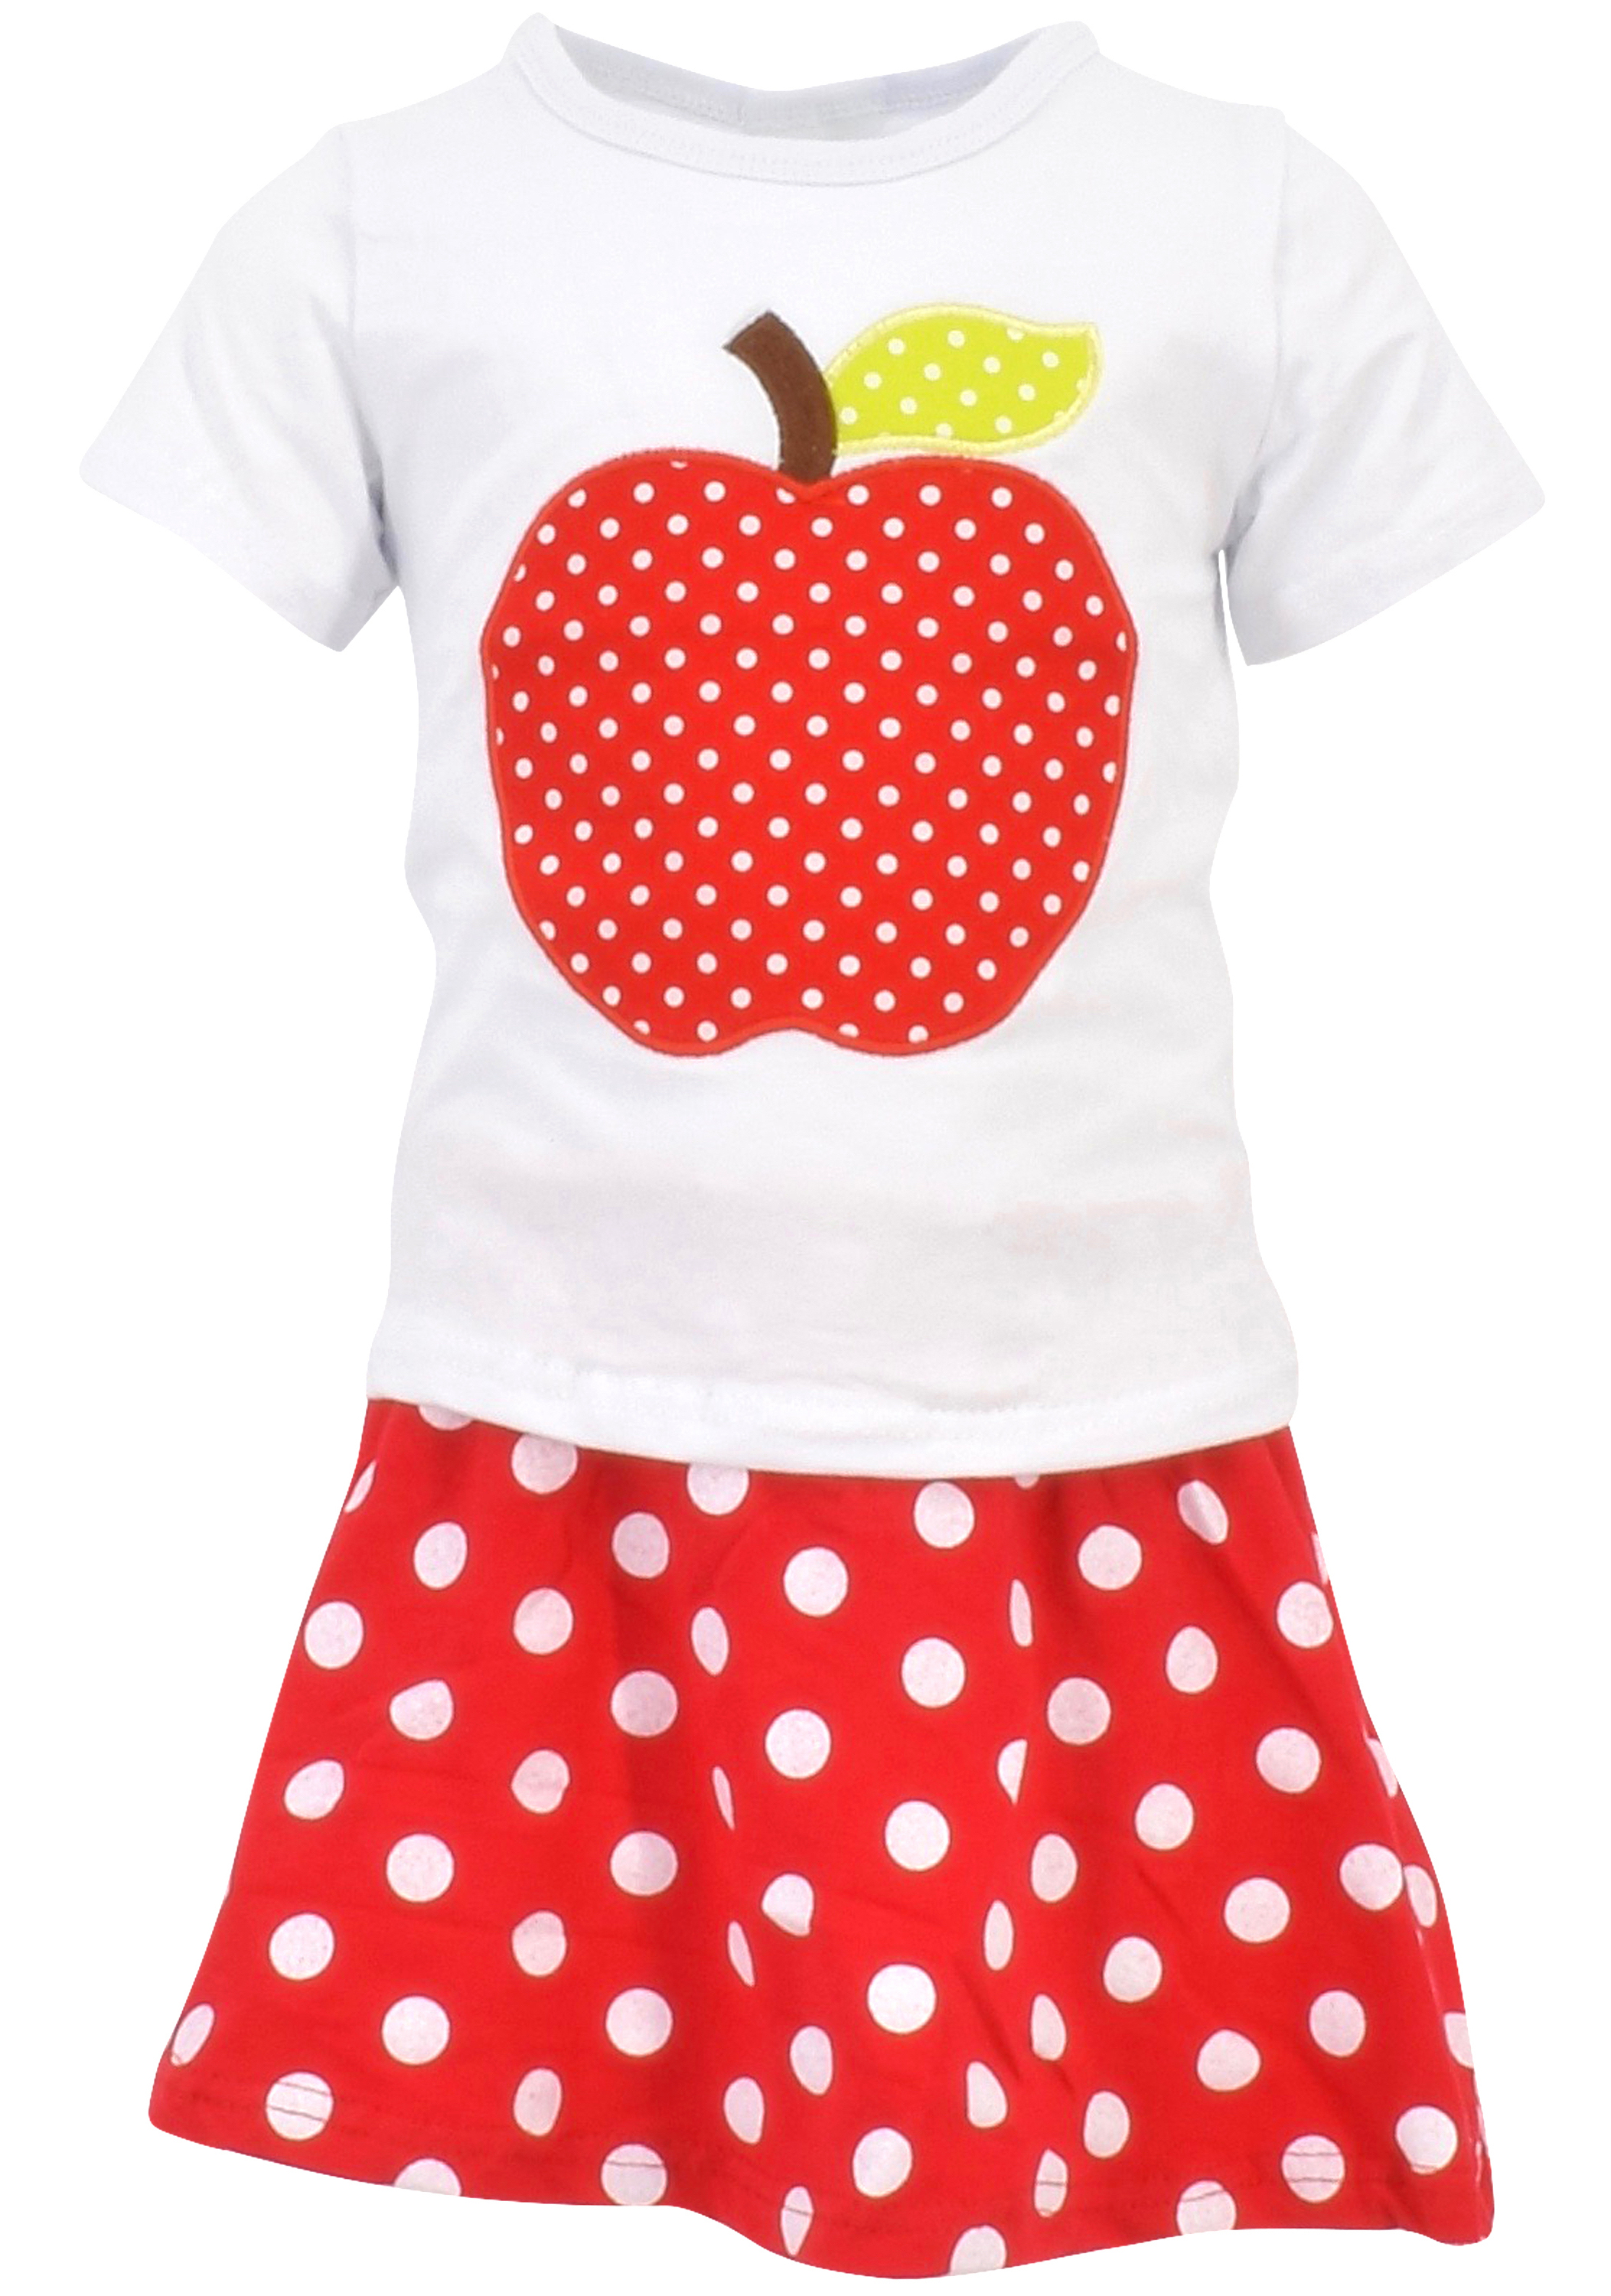 Unique Baby Girls Back to School Apple Skirt Boutique Outfit (4T/M, Red) - image 1 of 4